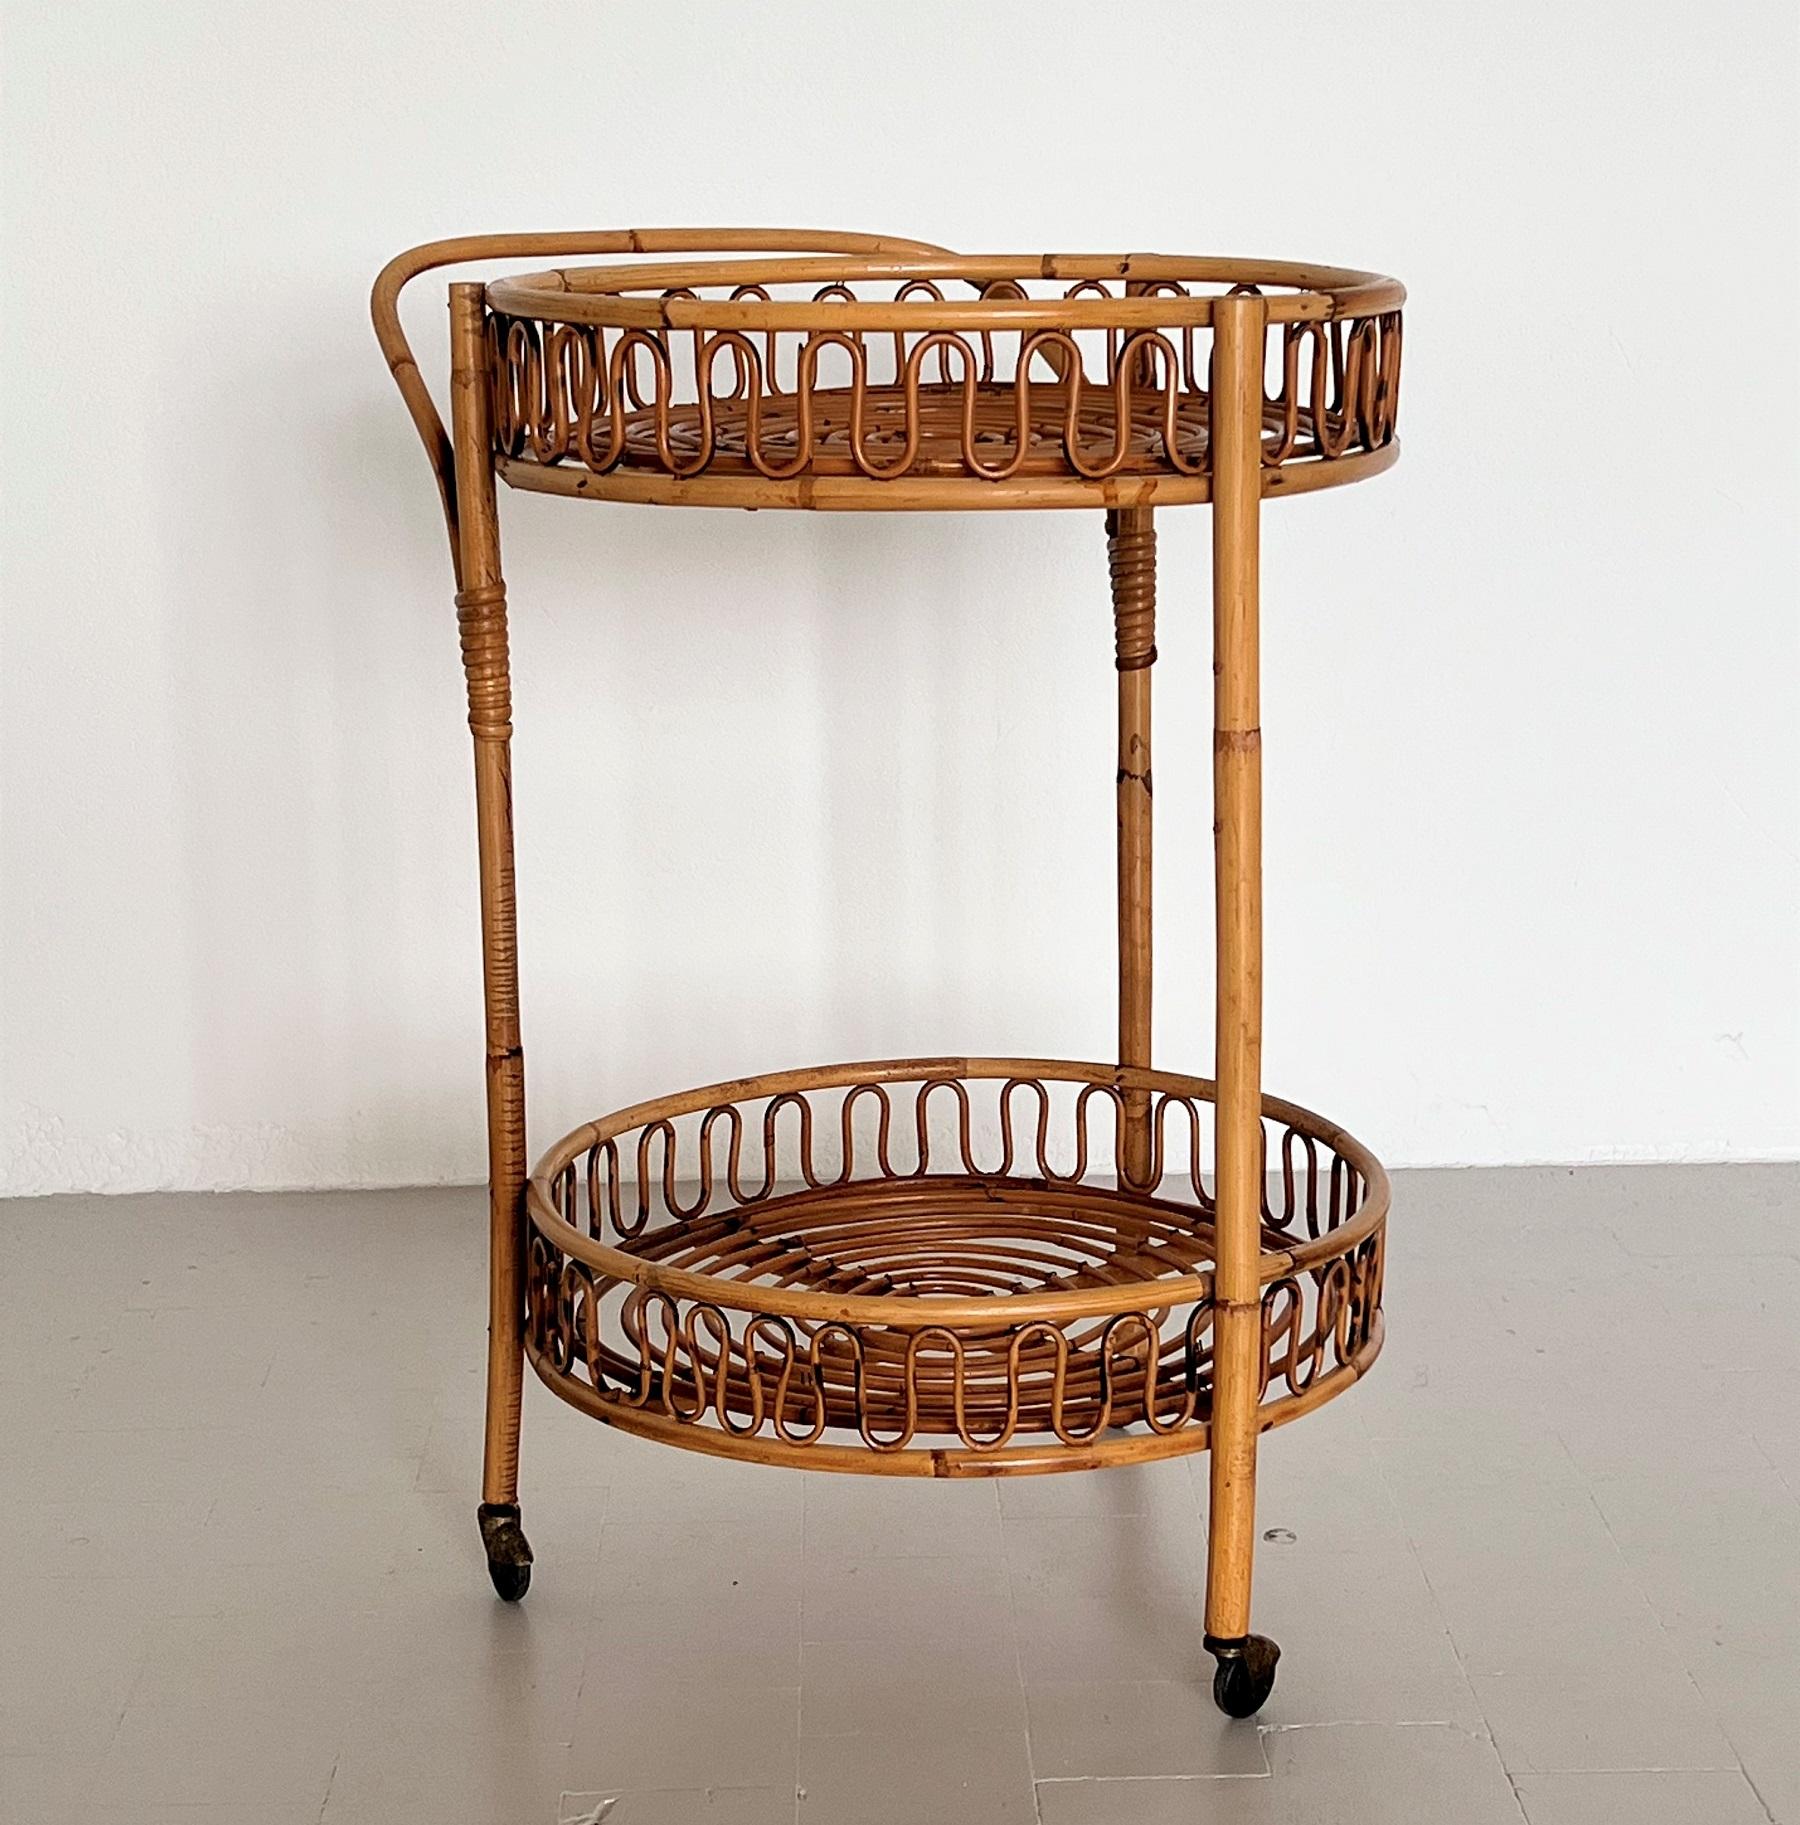 Gorgeous bar cart or trolley made of curved bamboo and rattan during the Italian mid-century in the 1970s.
The cart is circular with two tiers, handle, and 4 rollers. 
The four rollers are rolling smoothly.
Beautiful original and very good cleaned